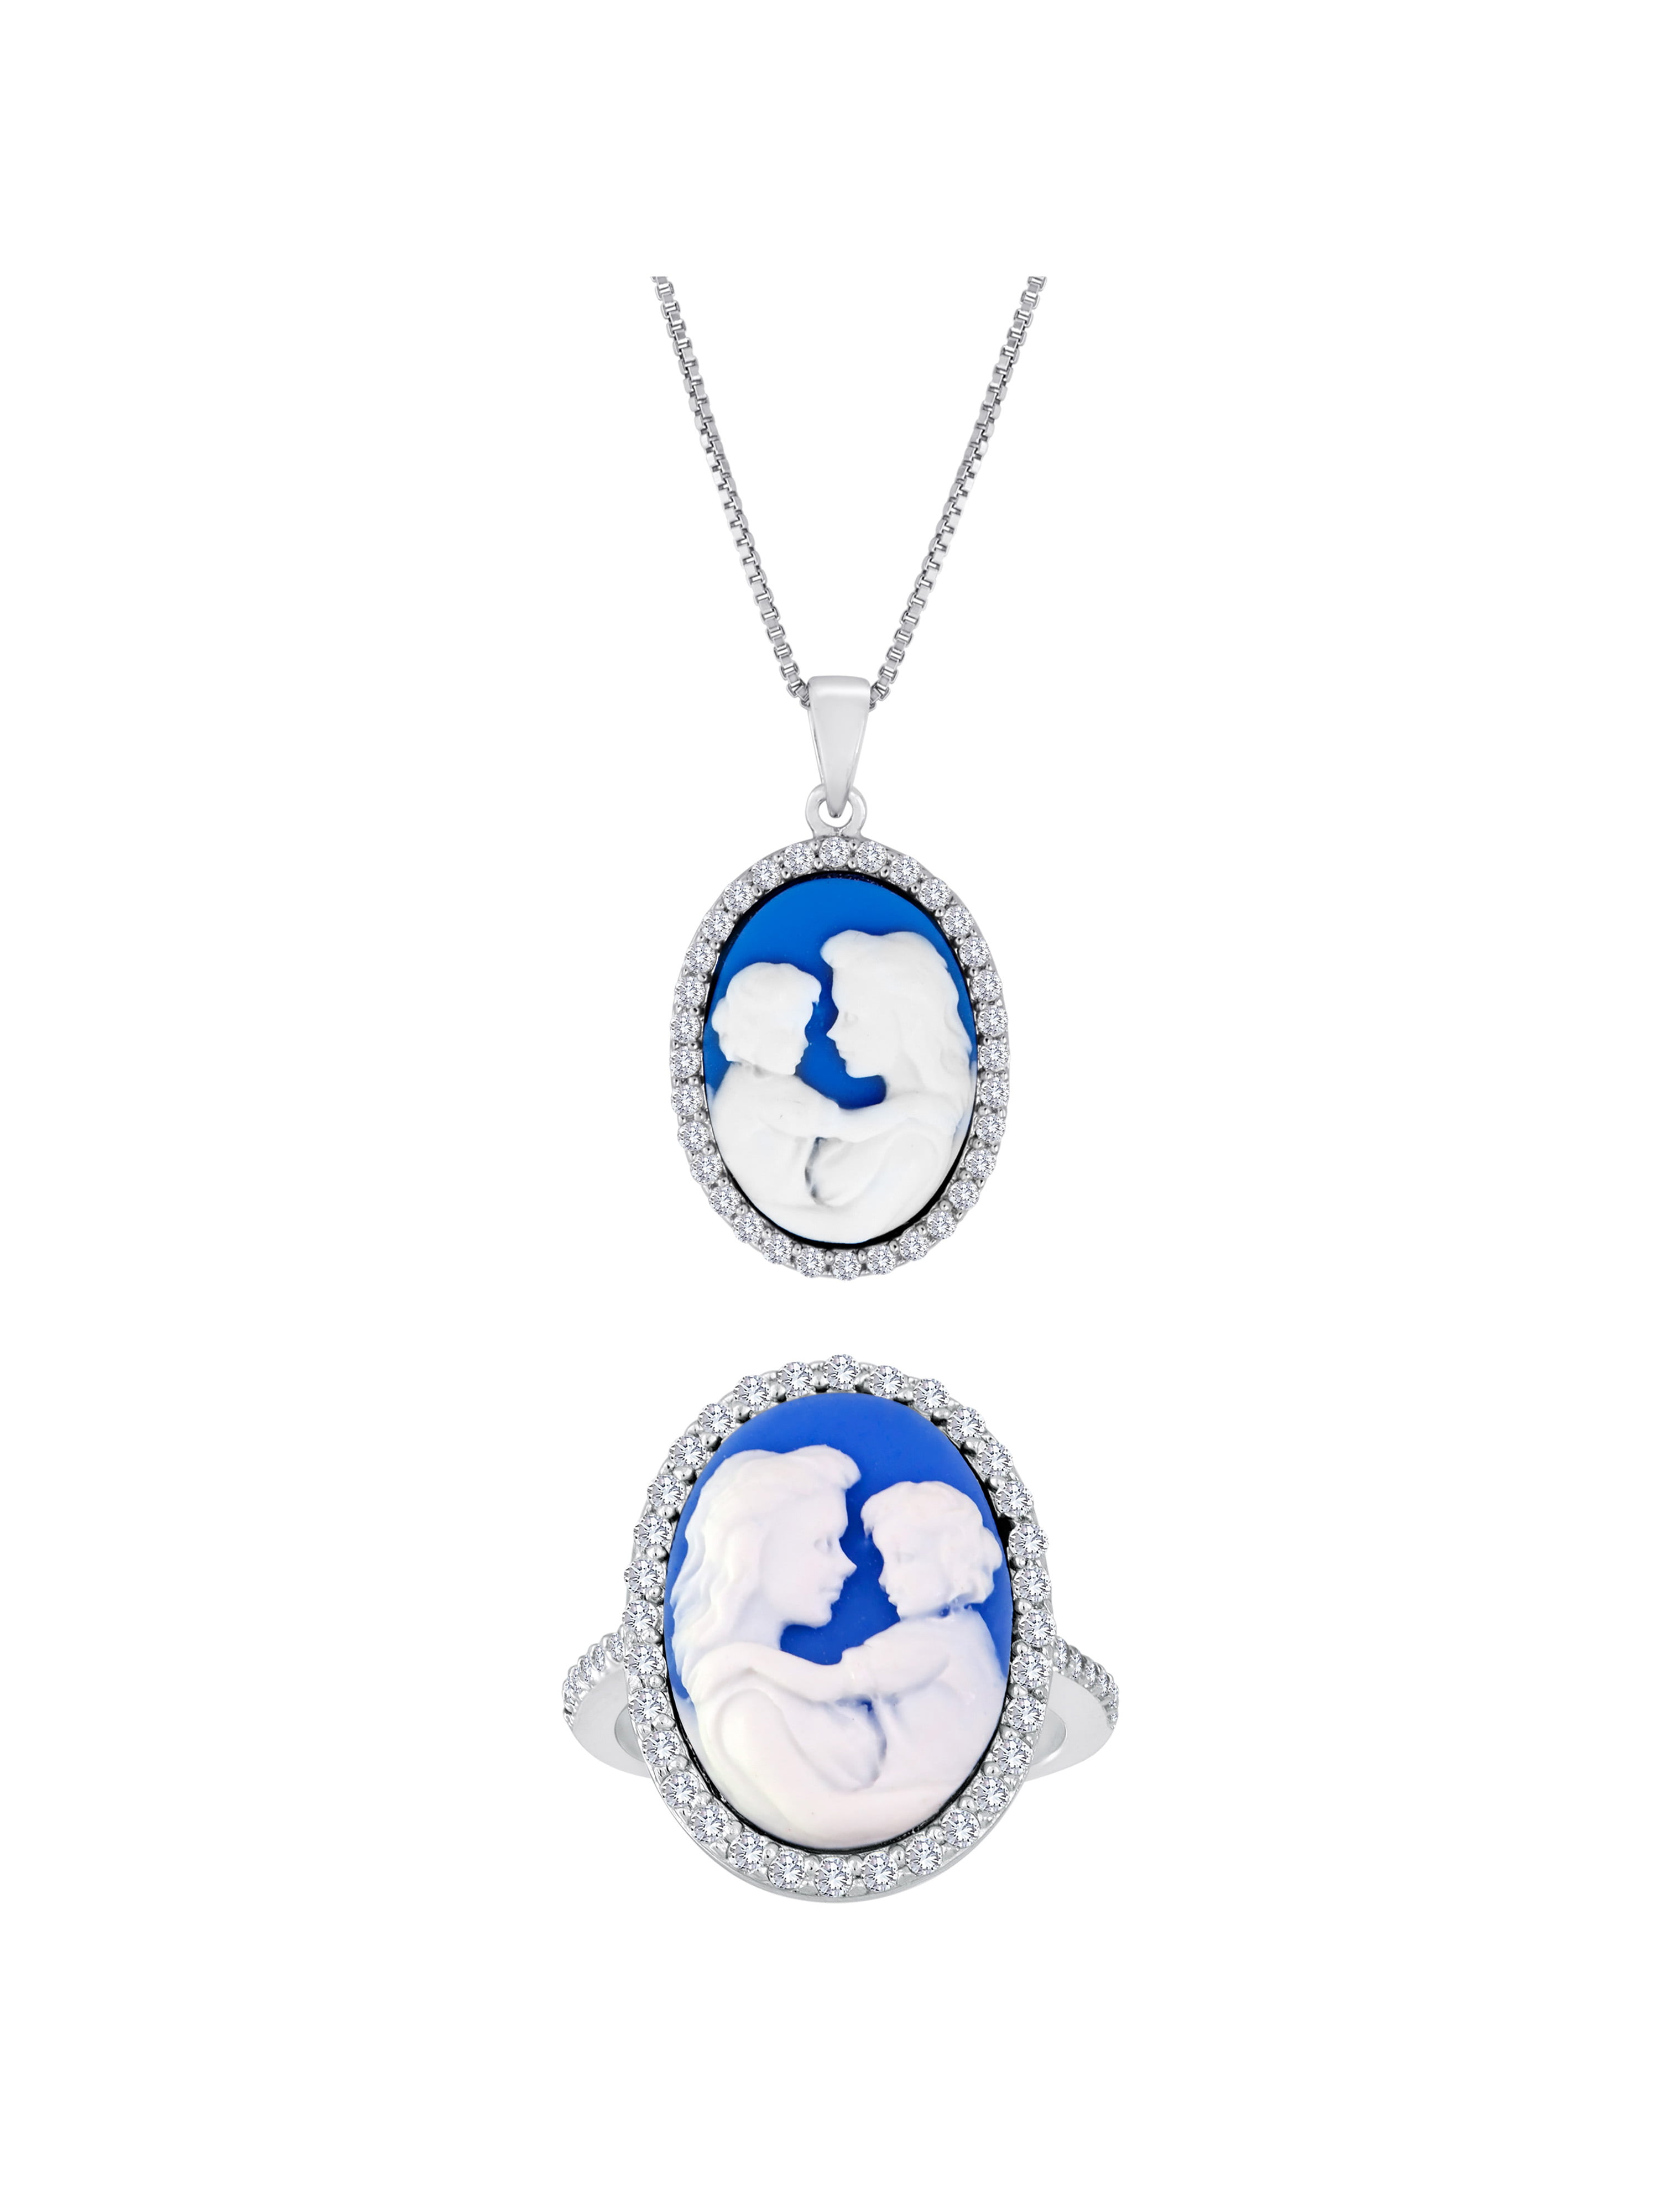 Small Wedgwood Jewelry Cameo in Silver-Plated Pendant 